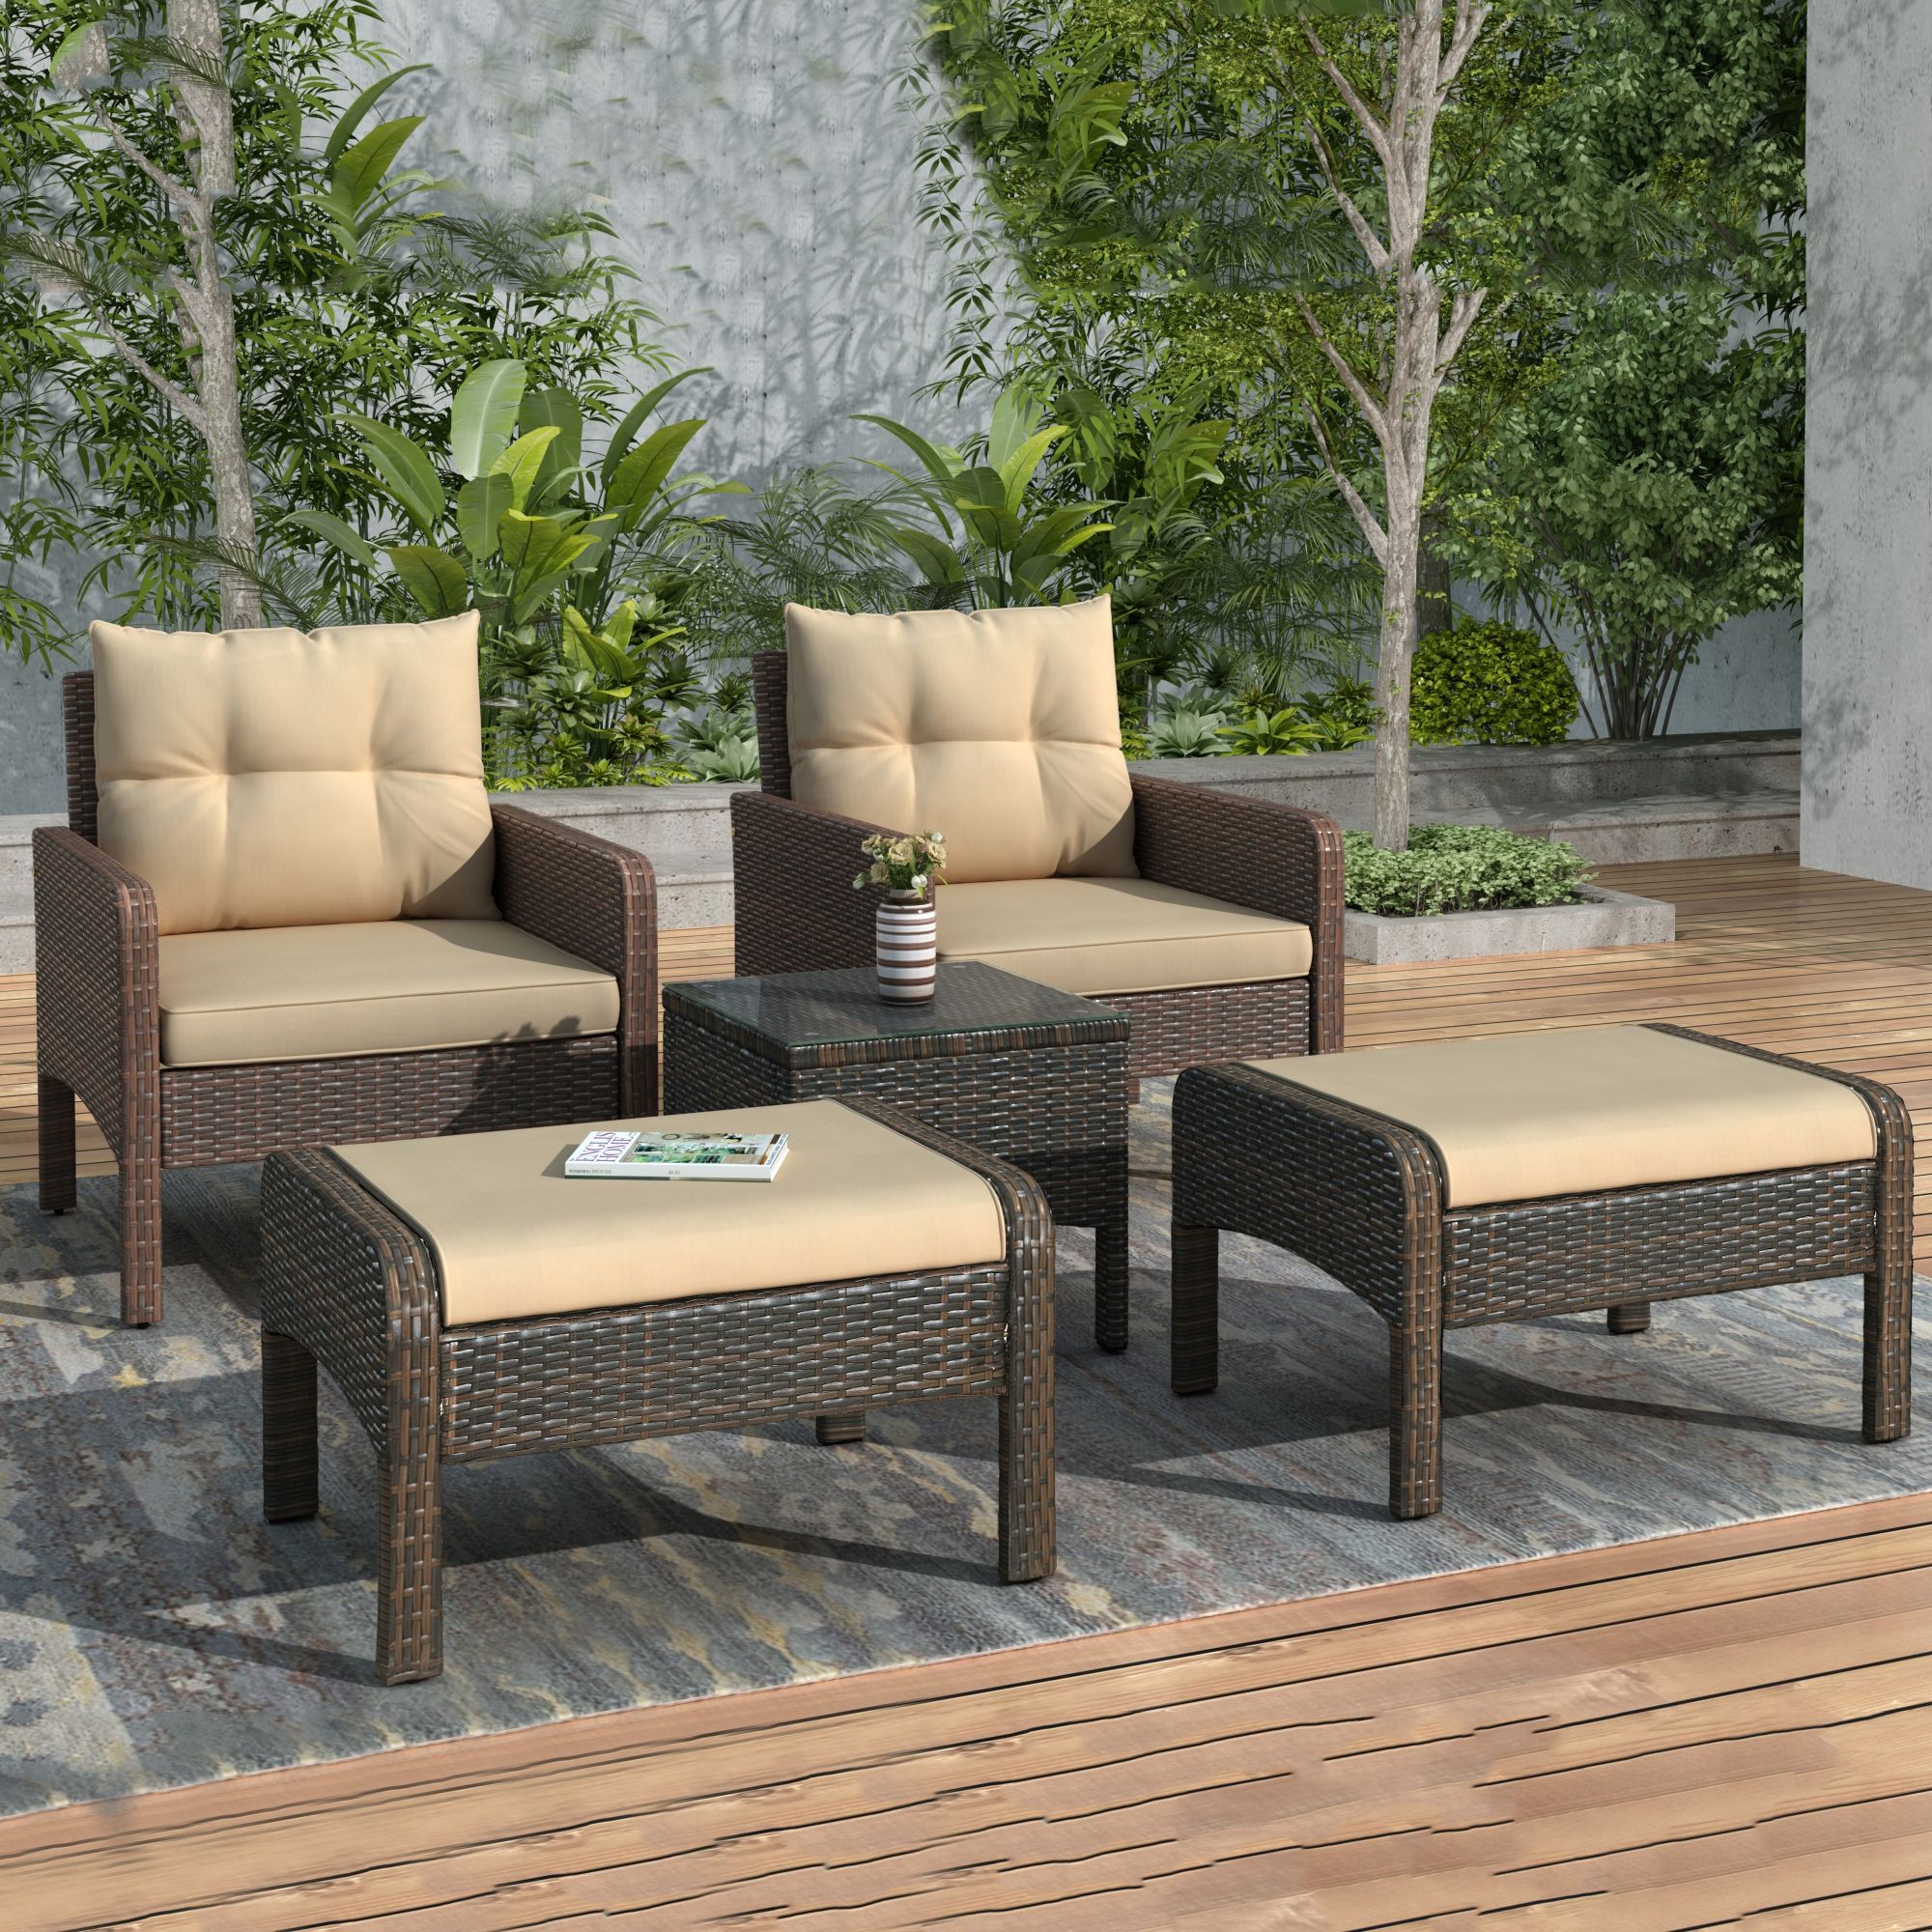 Urhomepro 5 Piece Patio Wicker Sofa Set, Outdoor Furniture Throughout 5 Piece Console Tables (Photo 5 of 20)